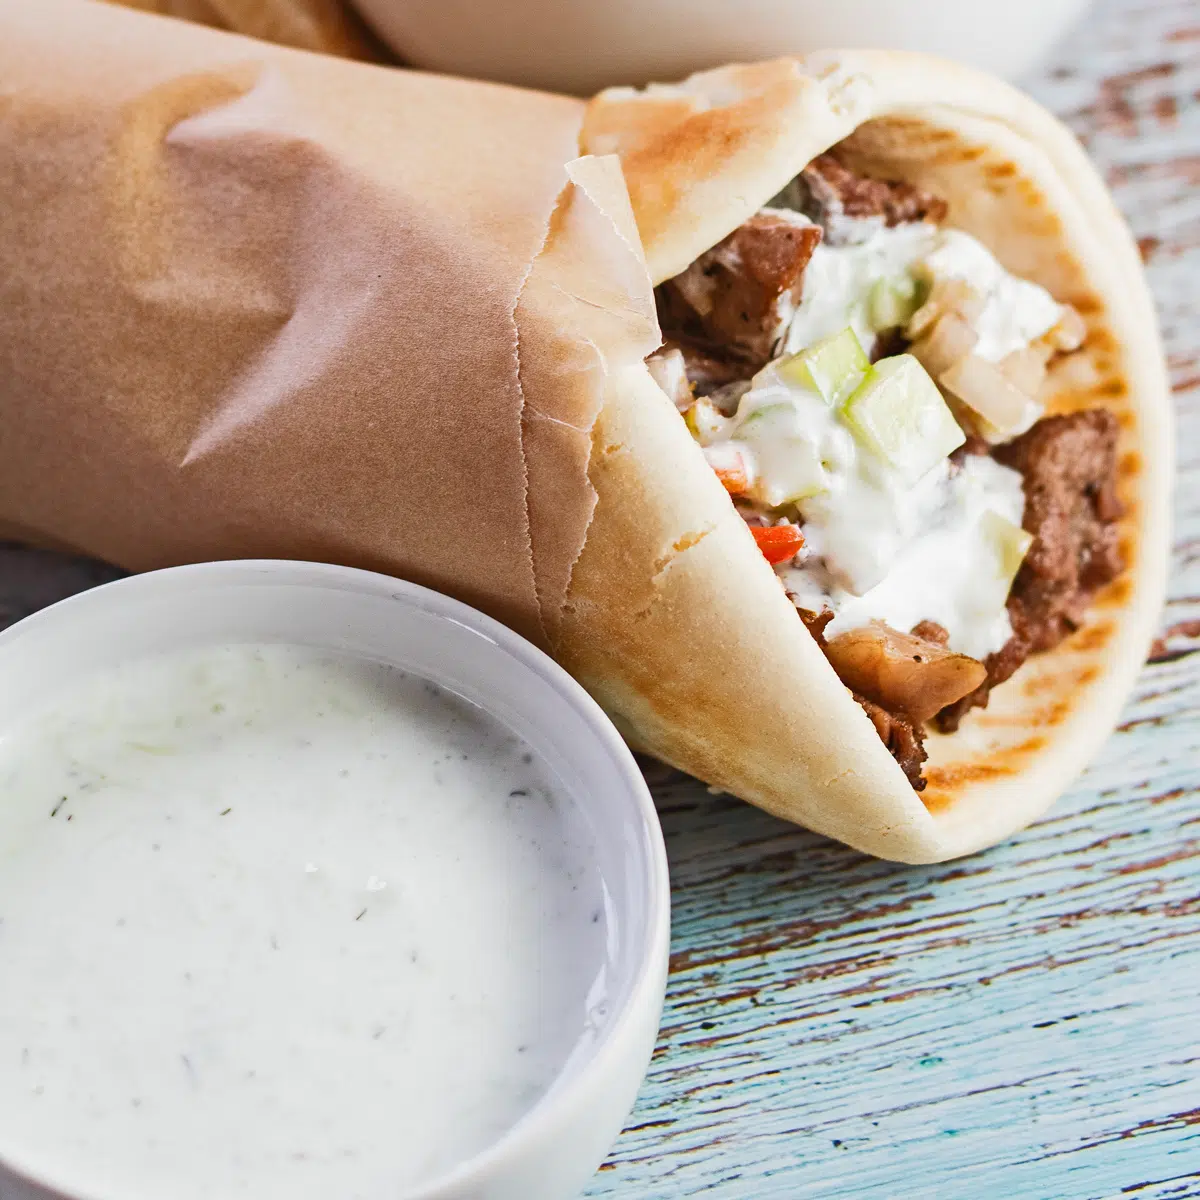 Tasty tzatziki sauce pairs well with this lamb gyros sandwich!